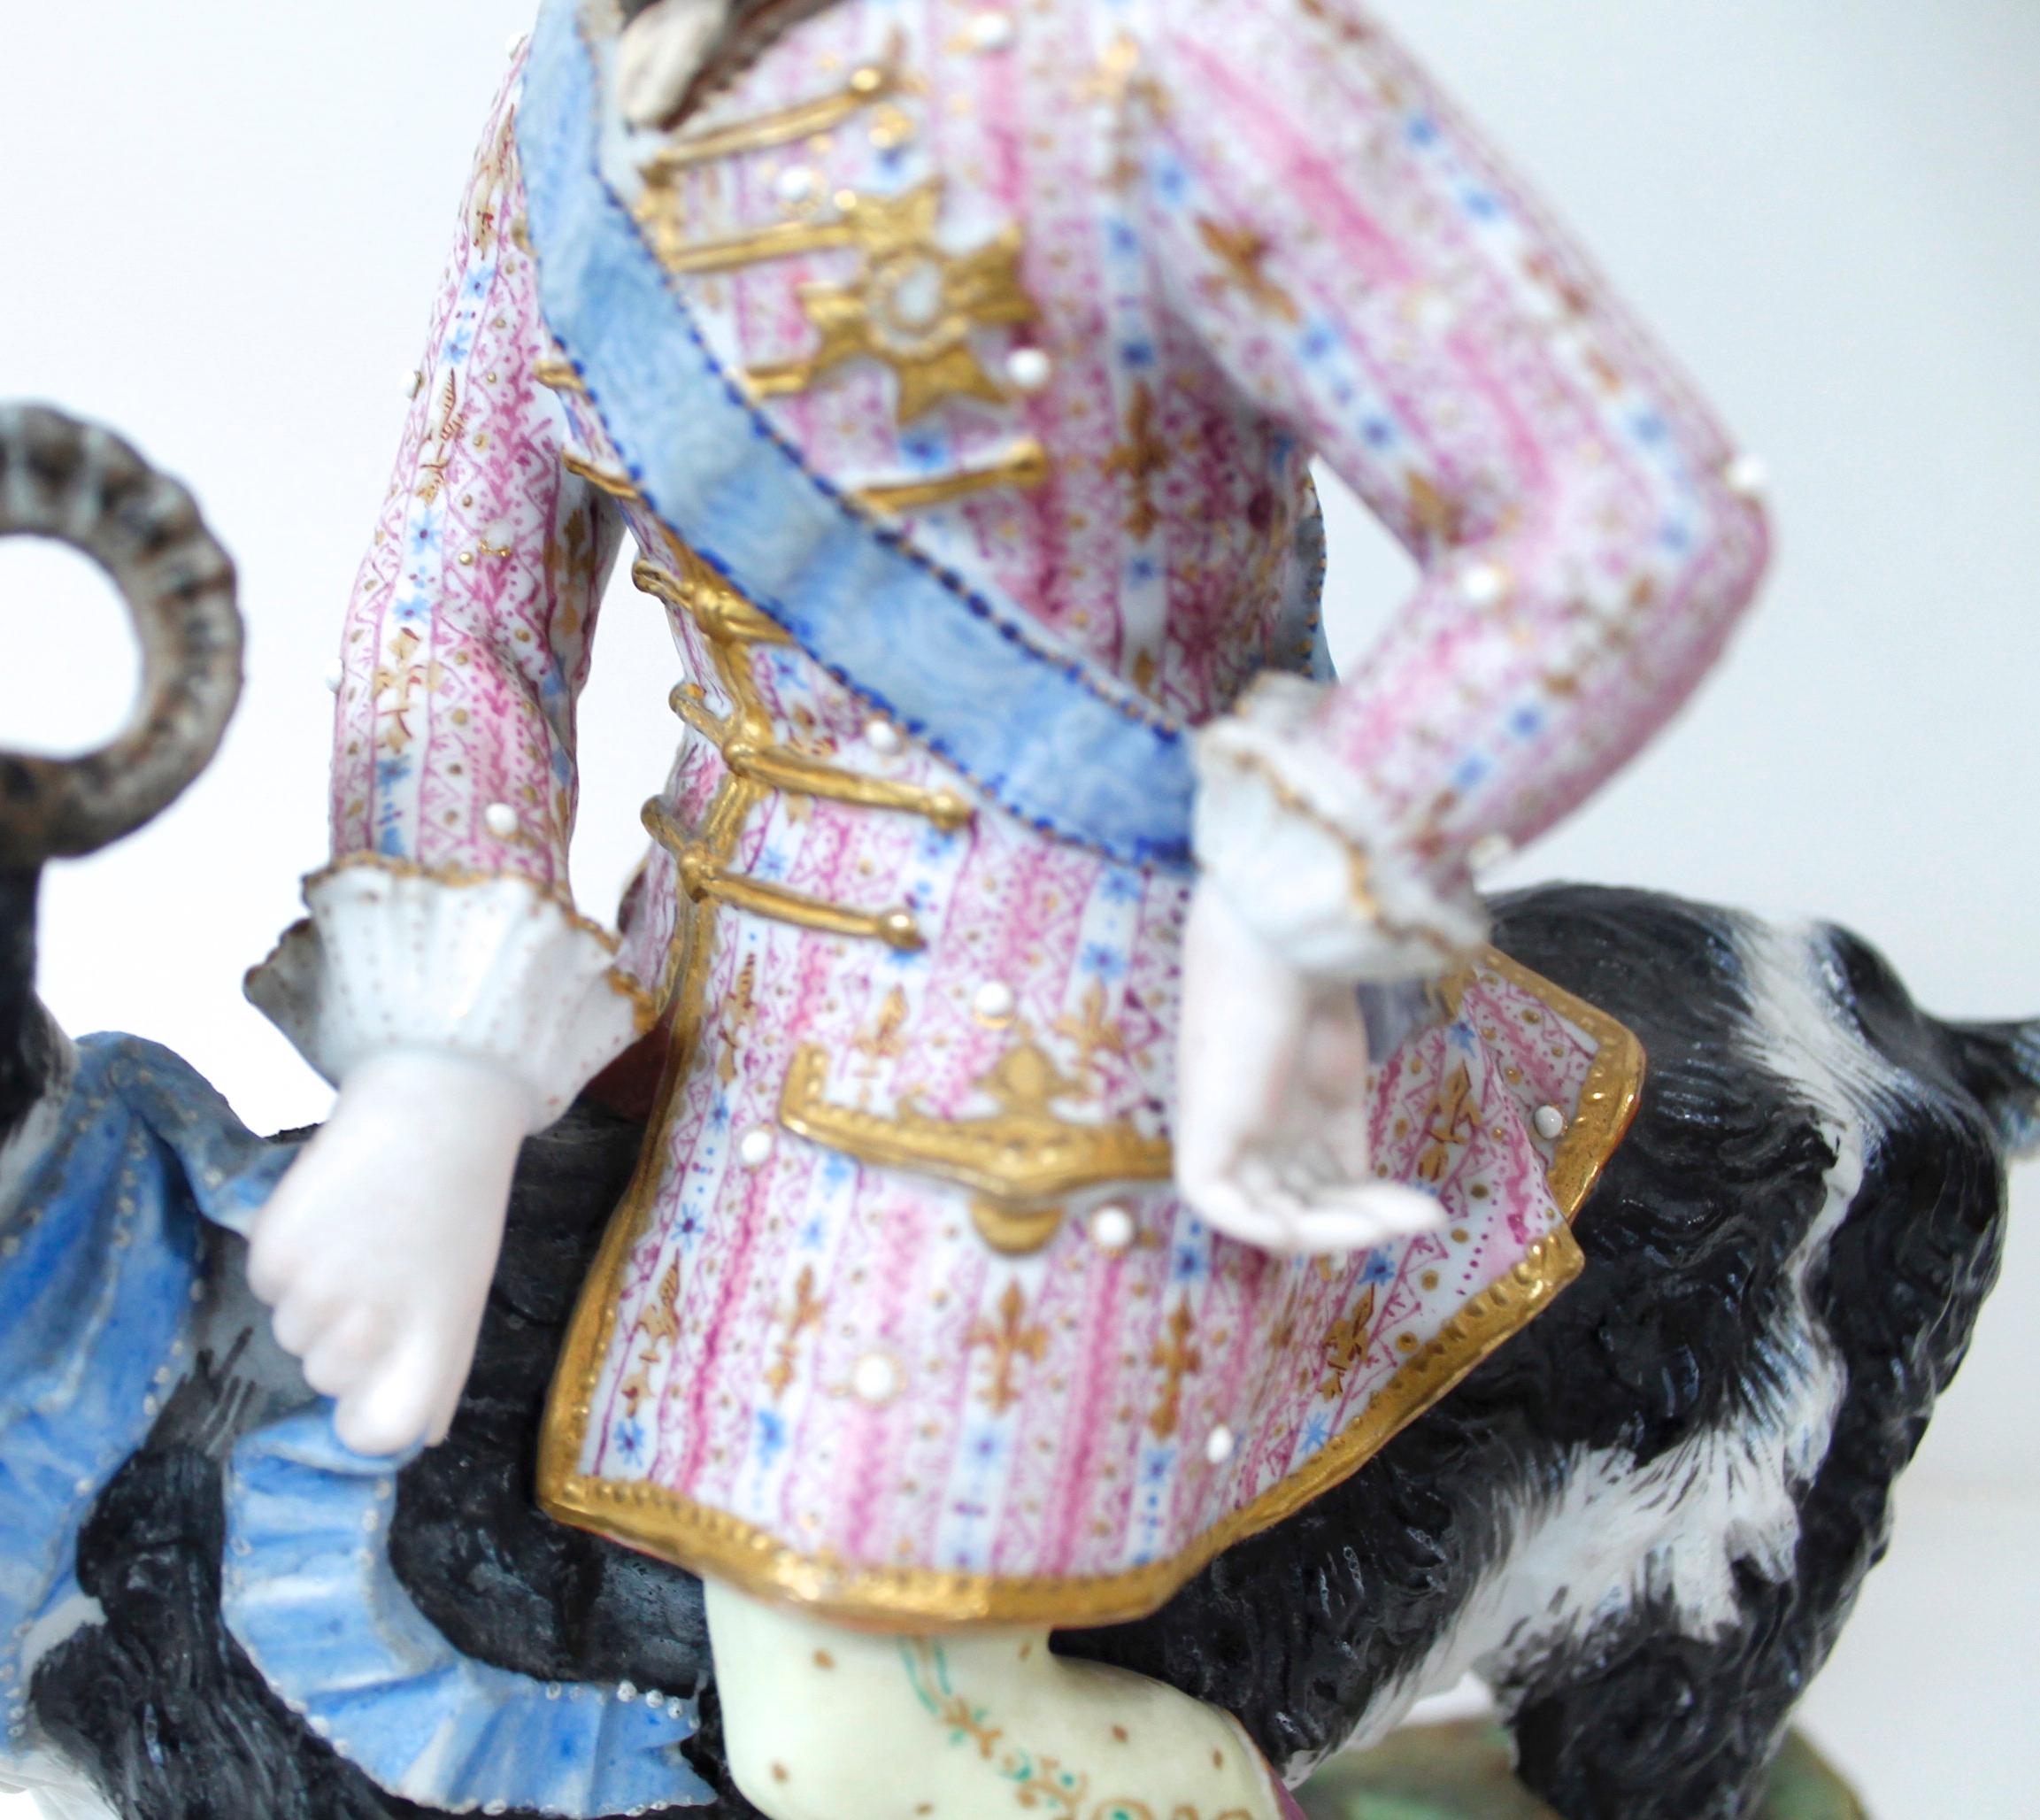 Cast Count Bruhl's Tailor, 19th C. Bisque Porcelain Goat And Rider By Vion Et Baury For Sale